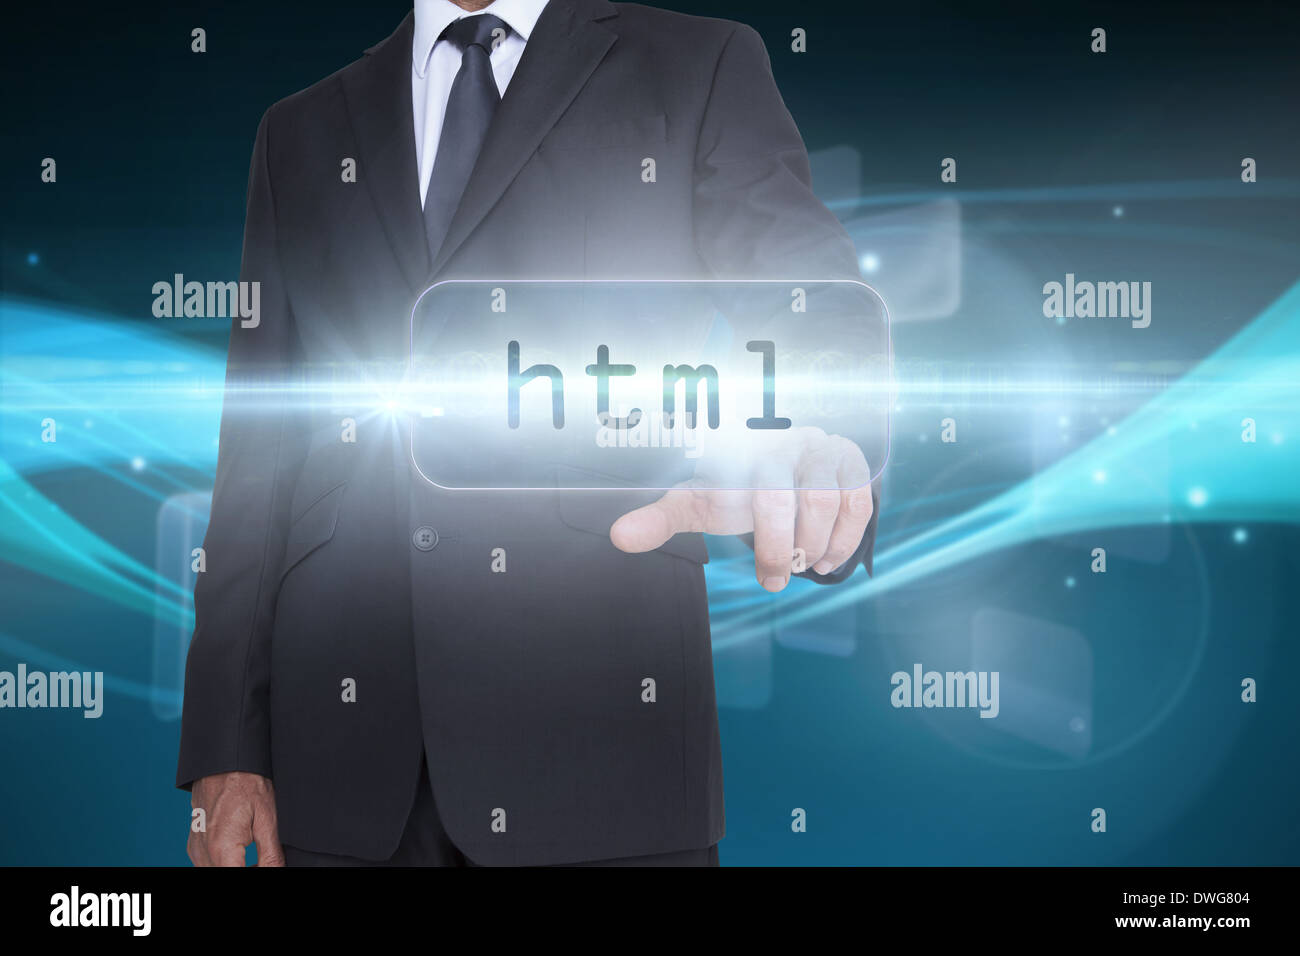 Html against abstract glowing black background Stock Photo